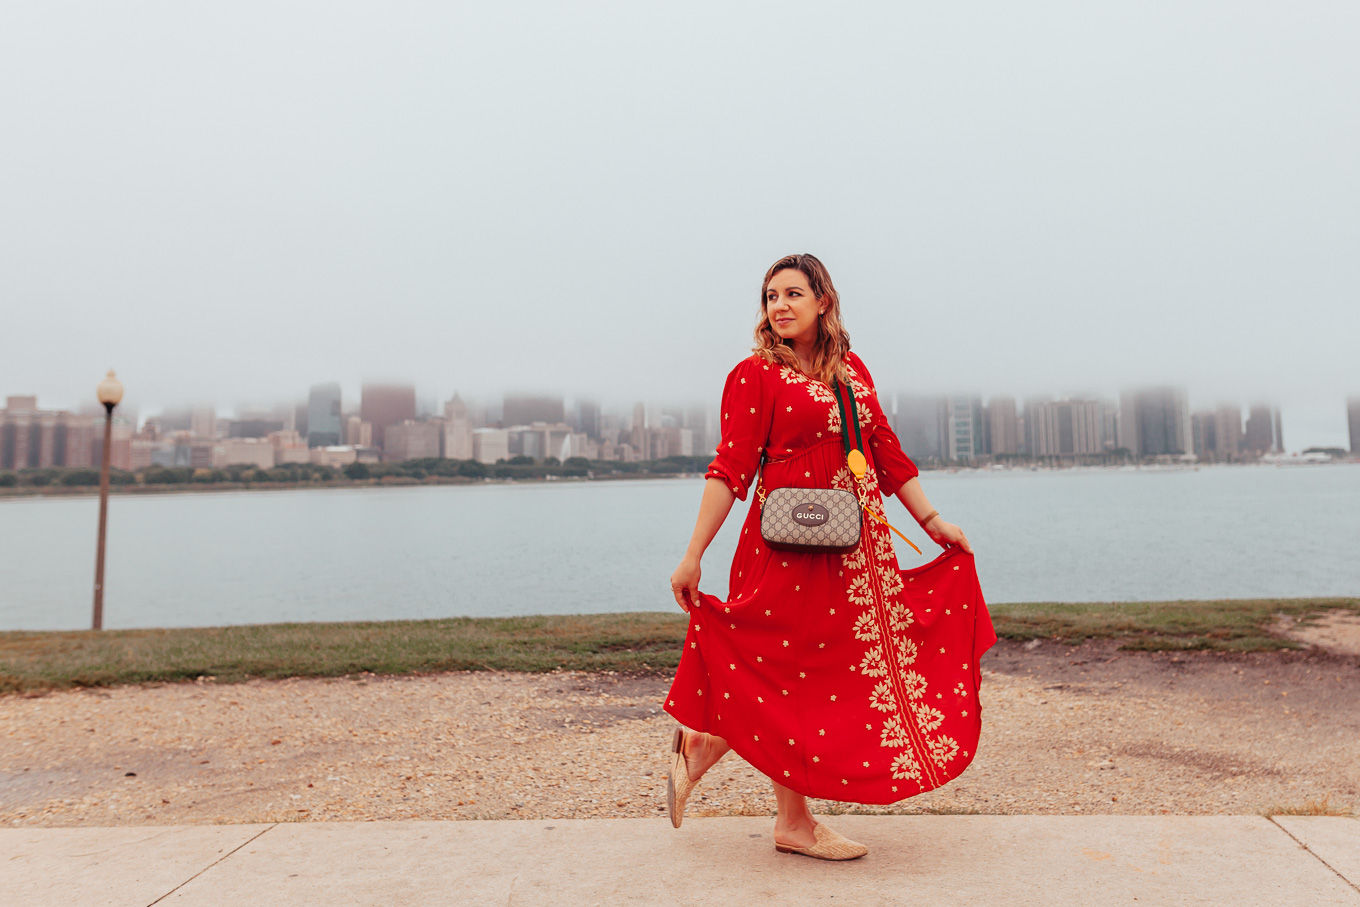 My New Mom Morning Routine by popular Chicago mom blog, Glass of Glam: image of a mom walking outside with her newborn baby and wearing an Anthropologie Embroidered Fable Midi Dress, STEVE MADDEN MATTIS MULE, Gucci GG Supreme messenger bag, and Little Me Leopard Footie. 